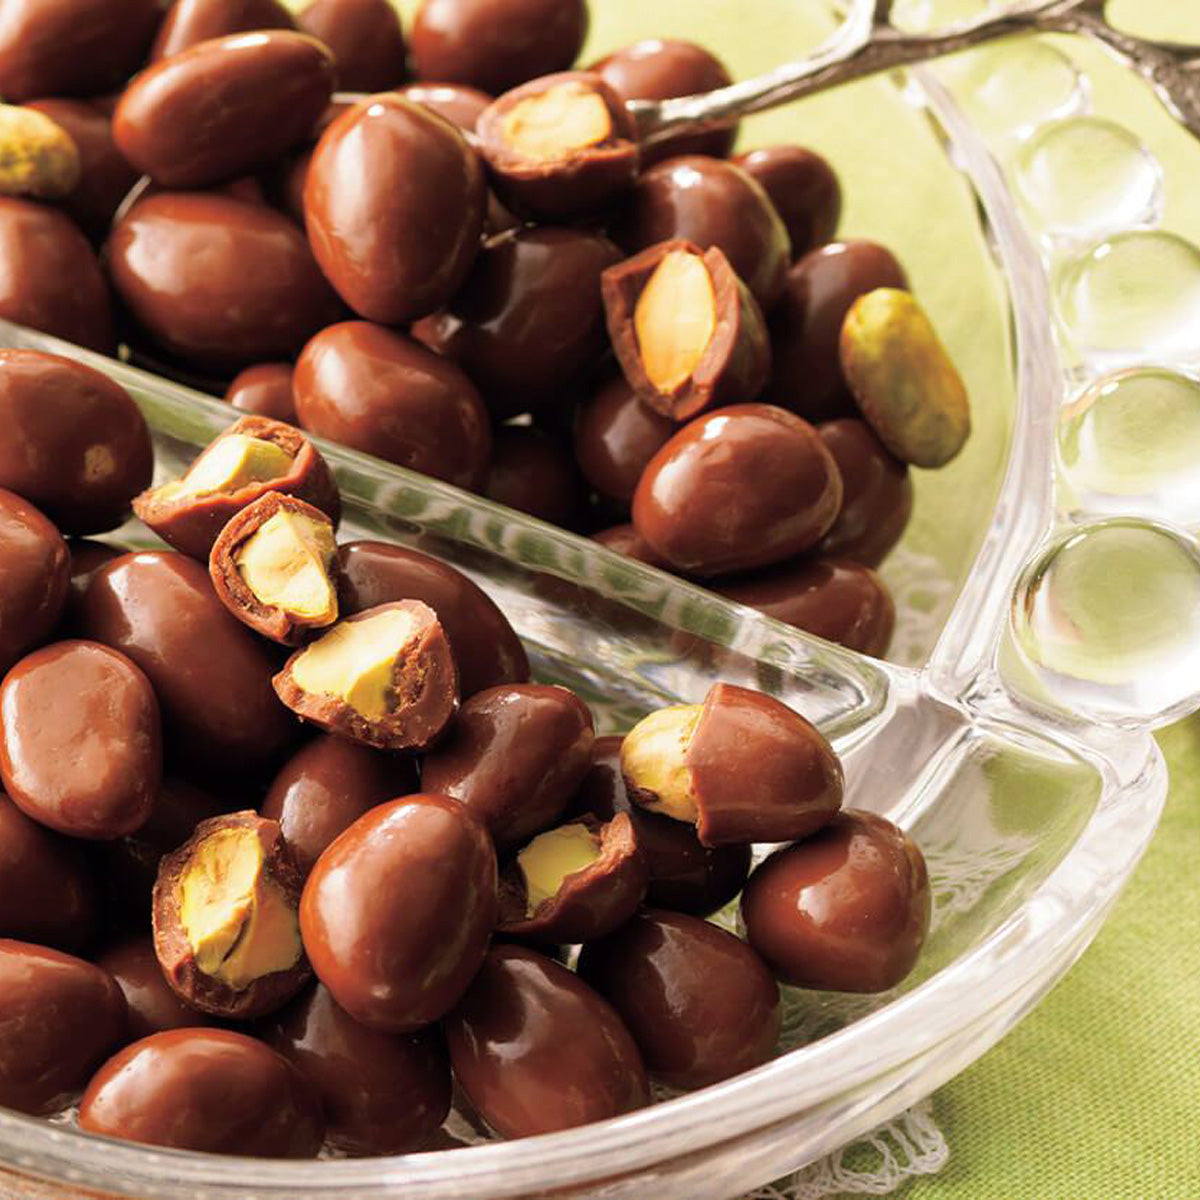 ROYCE' Chocolate - Pistachio Chocolate - Image shows a clear bowl filled with brown chocolate-coated pistachios. 